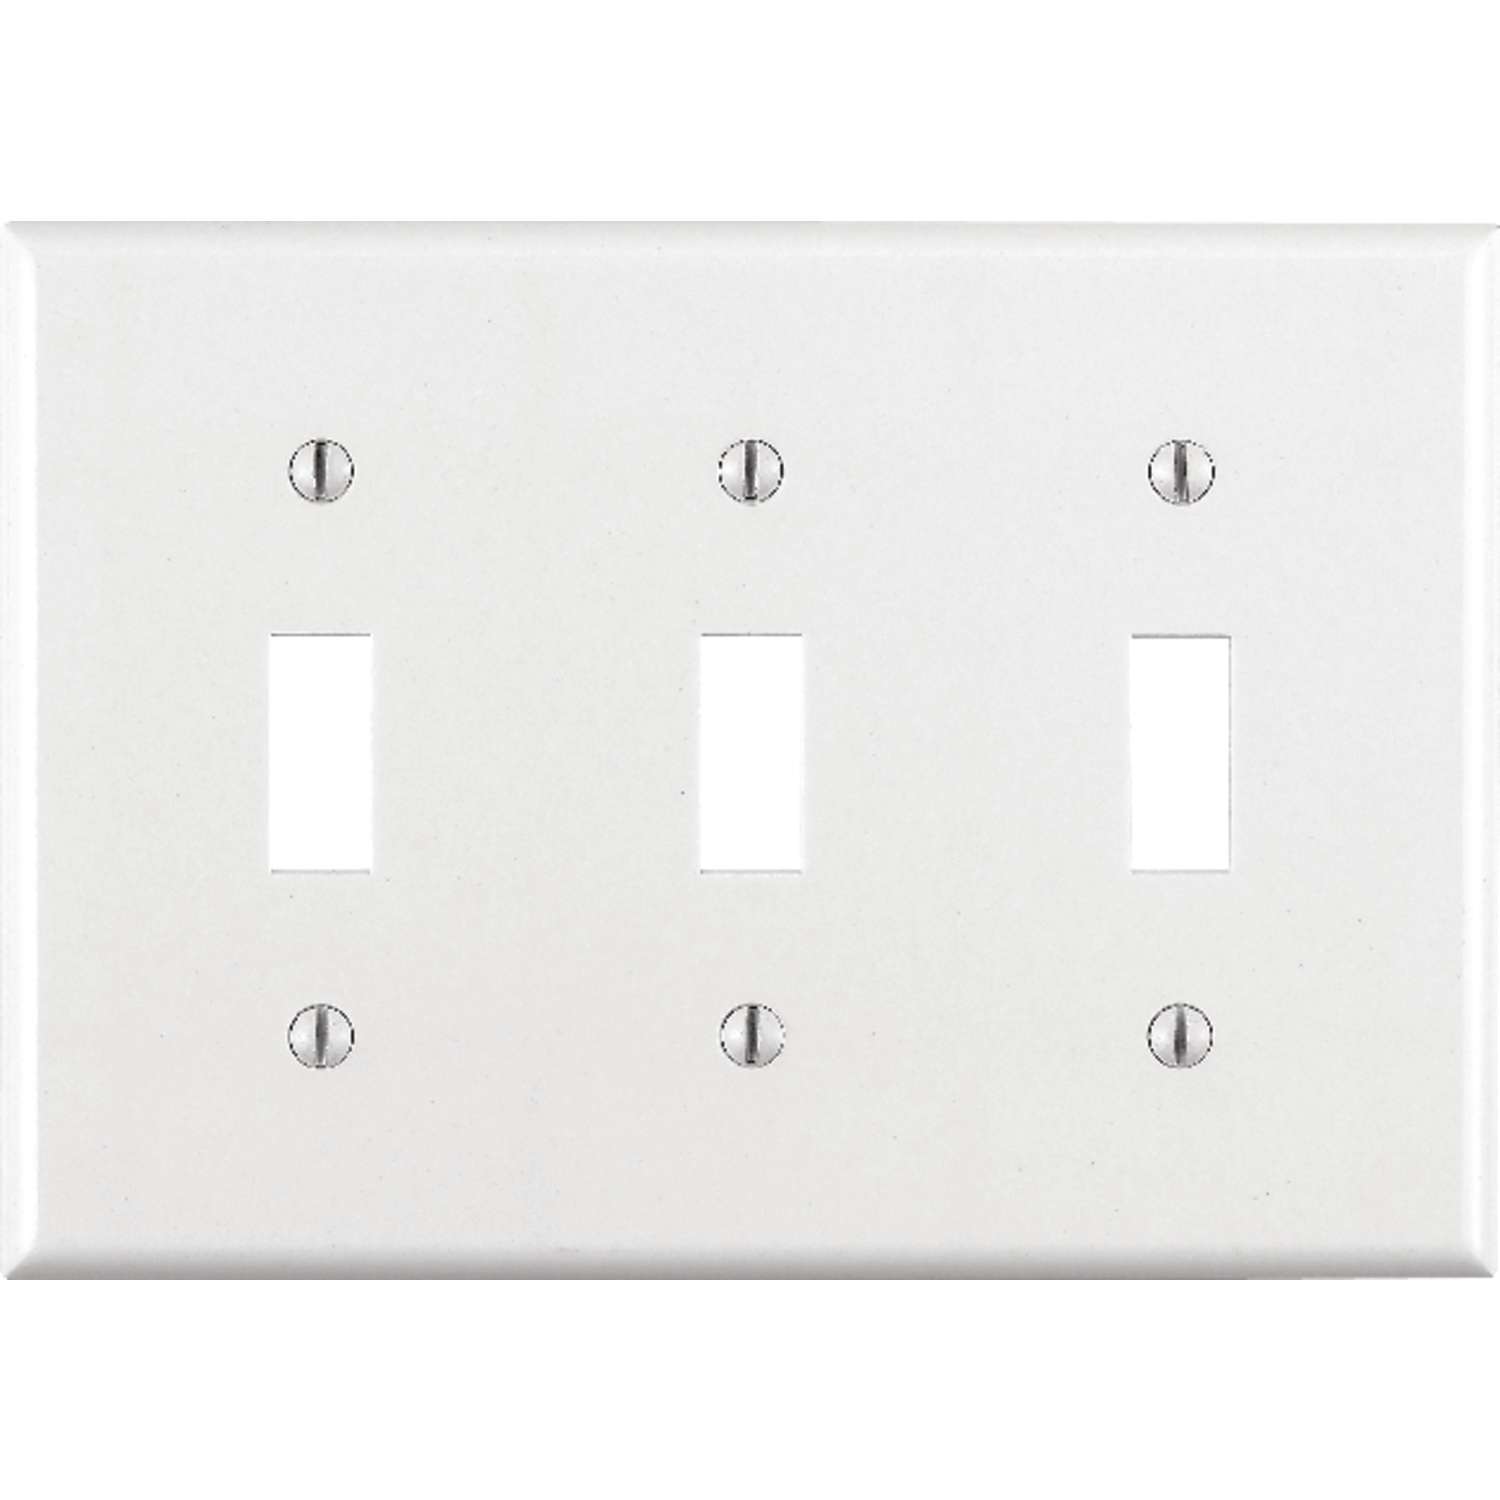 Leviton Brn Outlet Wall Plate 